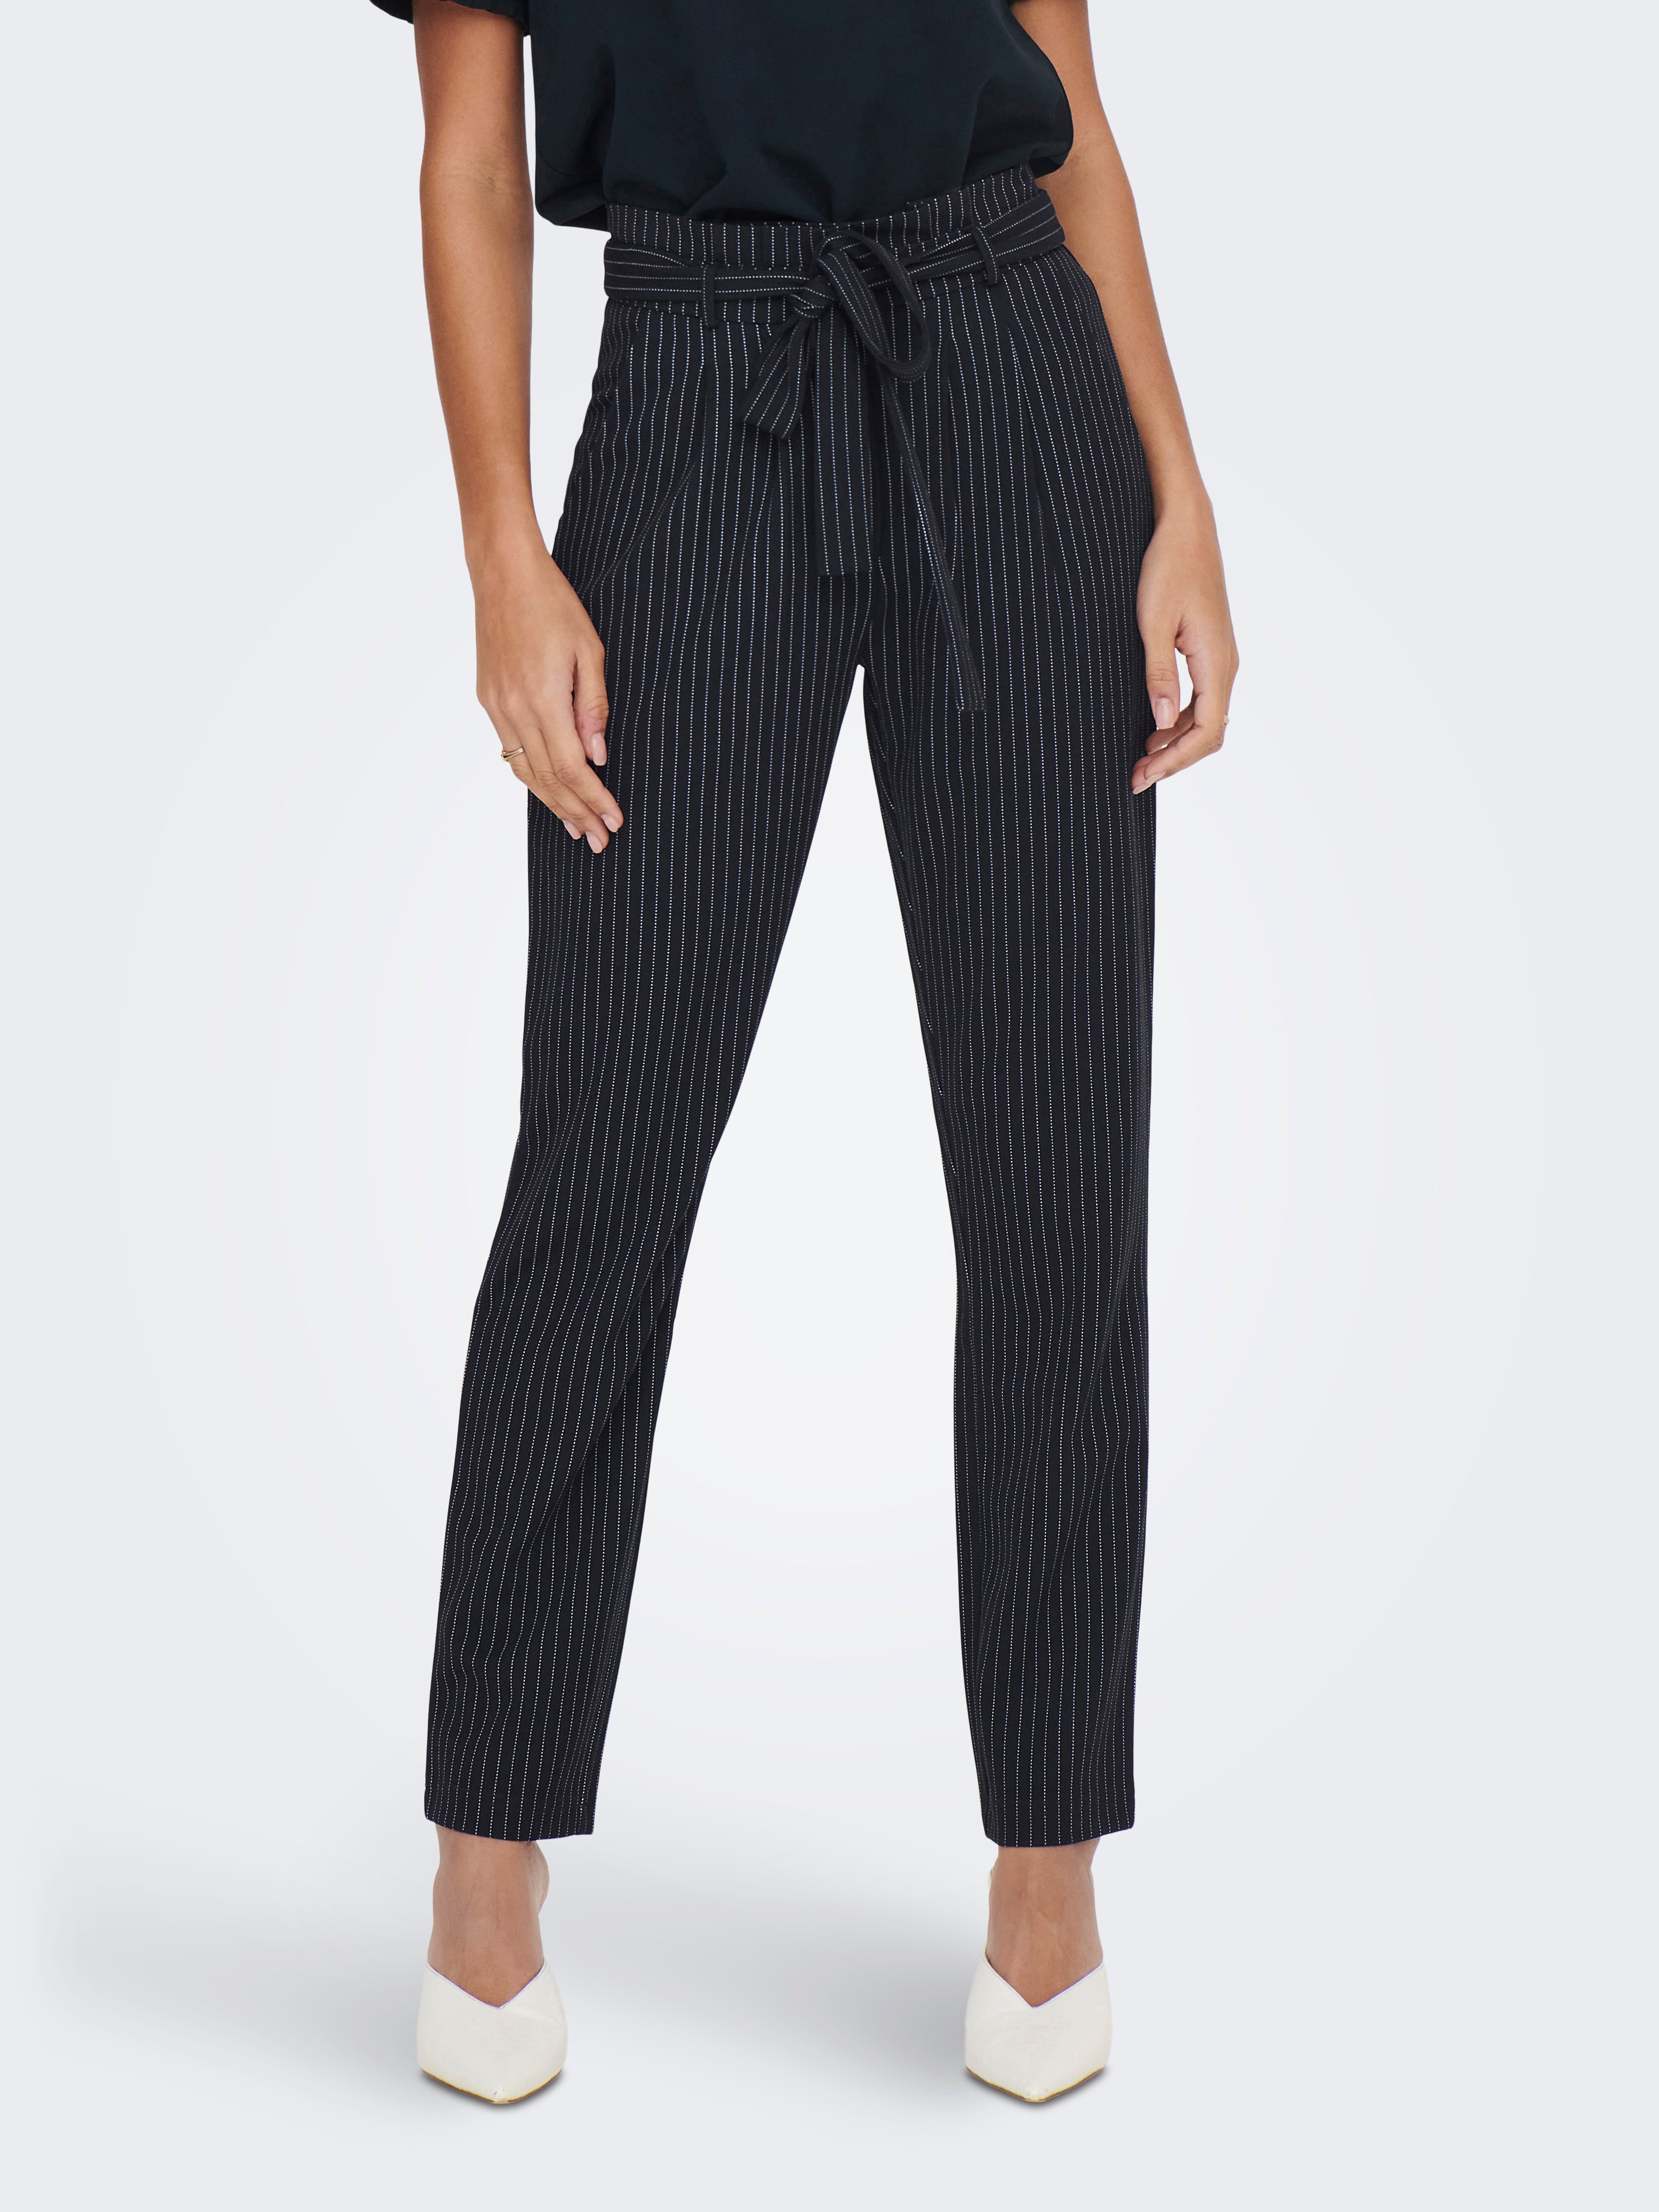 Women's Trousers, Ladies Classic Trousers | Country Collection